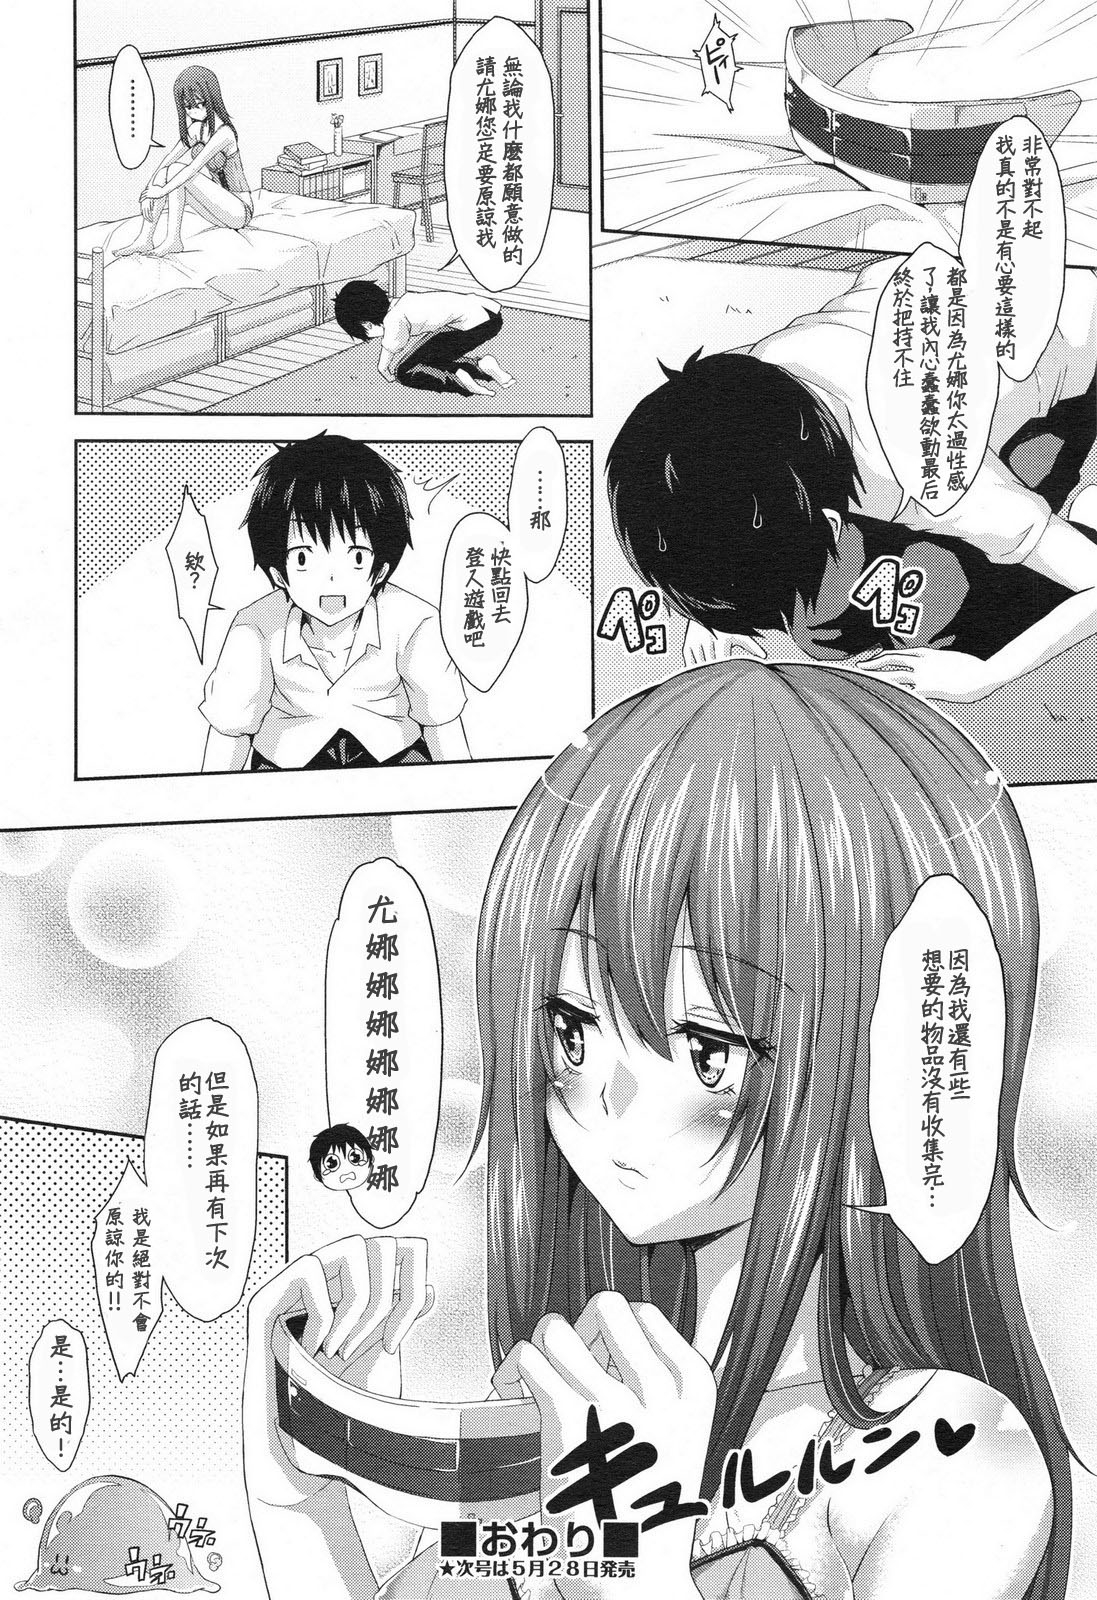 [Outou Chieri] Online Game (COMIC AUN 2013-06) [Chinese] [M·C個人漢化] 21